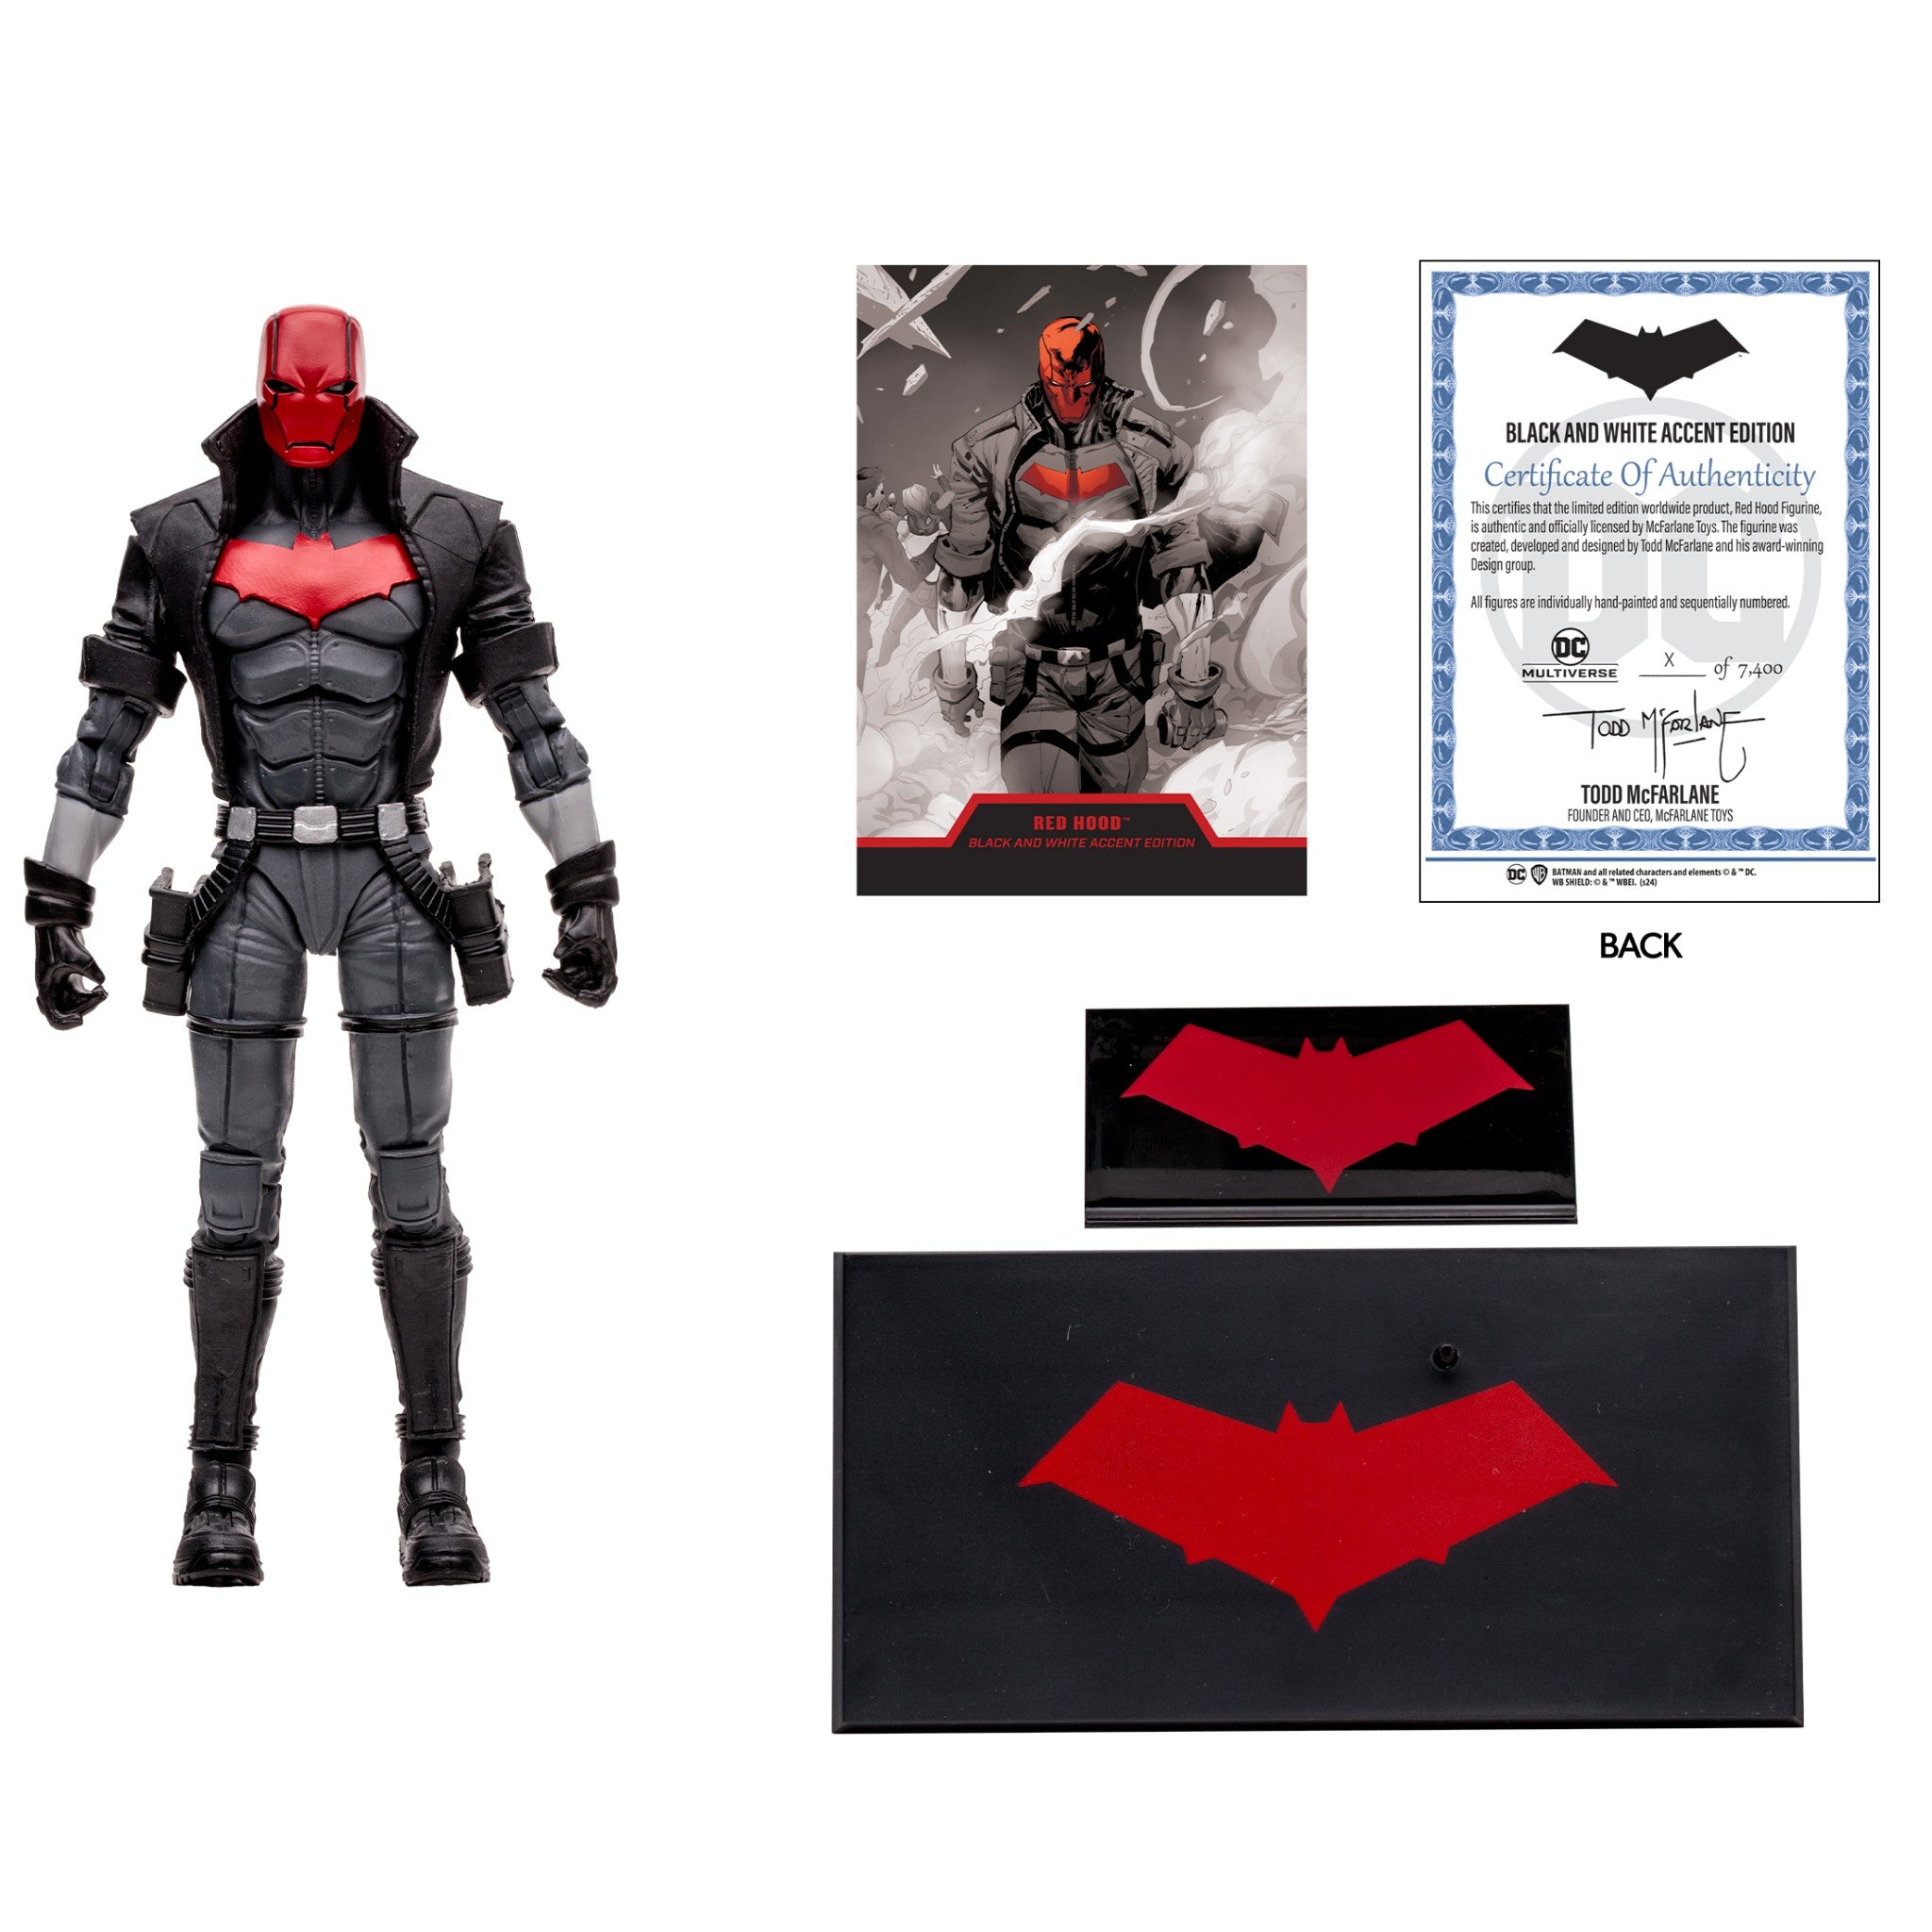 DC Multiverse New 52 Black & White Accent Edition Red Hood Gold Label- McFarlane-3